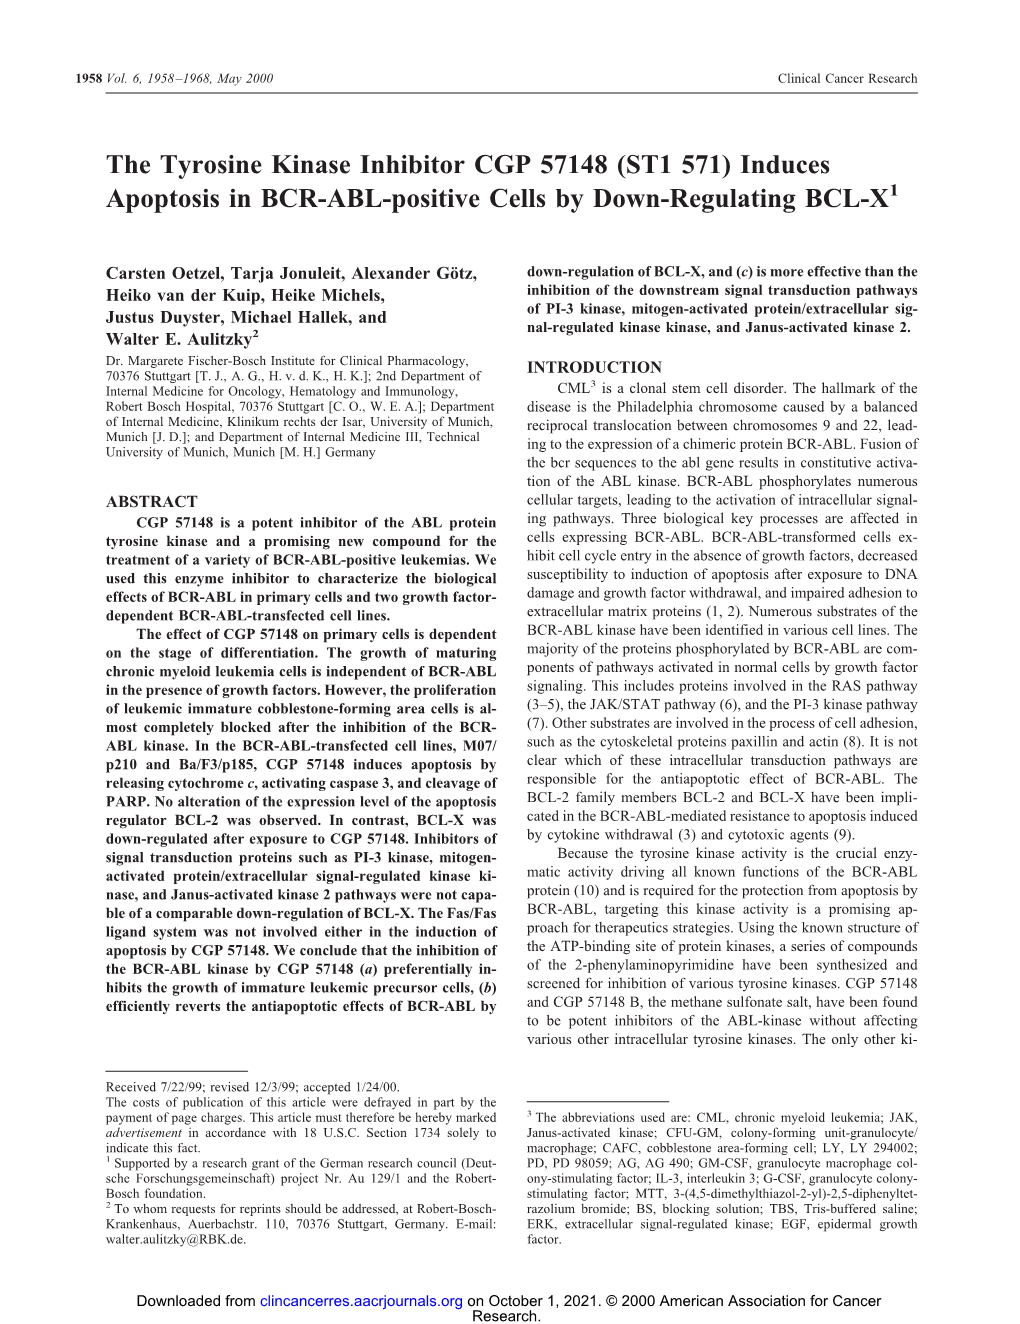 The Tyrosine Kinase Inhibitor CGP 57148 (ST1 571) Induces Apoptosis in BCR-ABL-Positive Cells by Down-Regulating BCL-X1